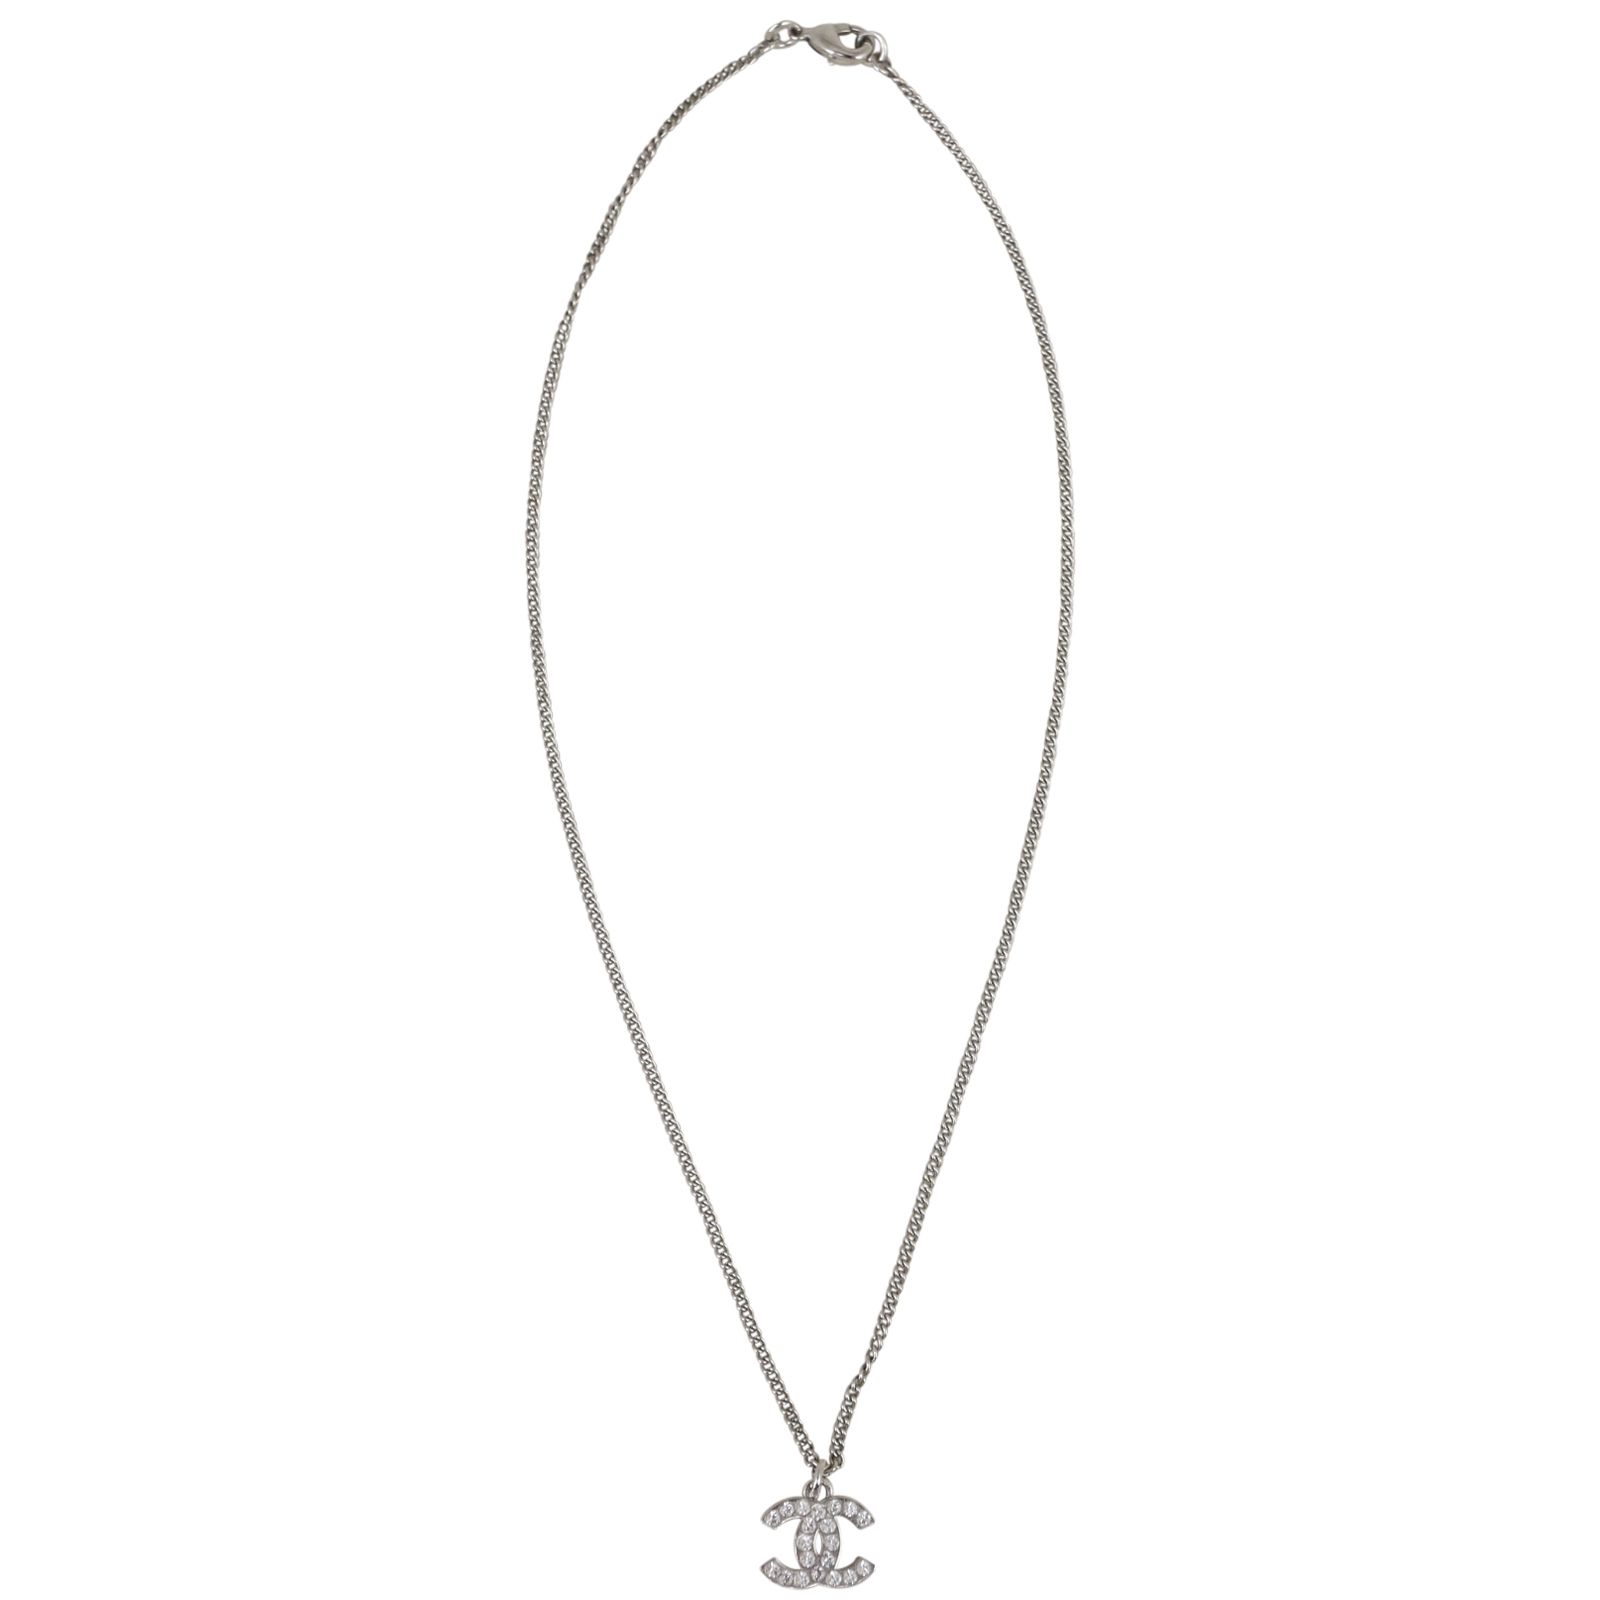 Chanel Cc Crystal Silver Tone Pendant Necklace in Metallic  Lyst